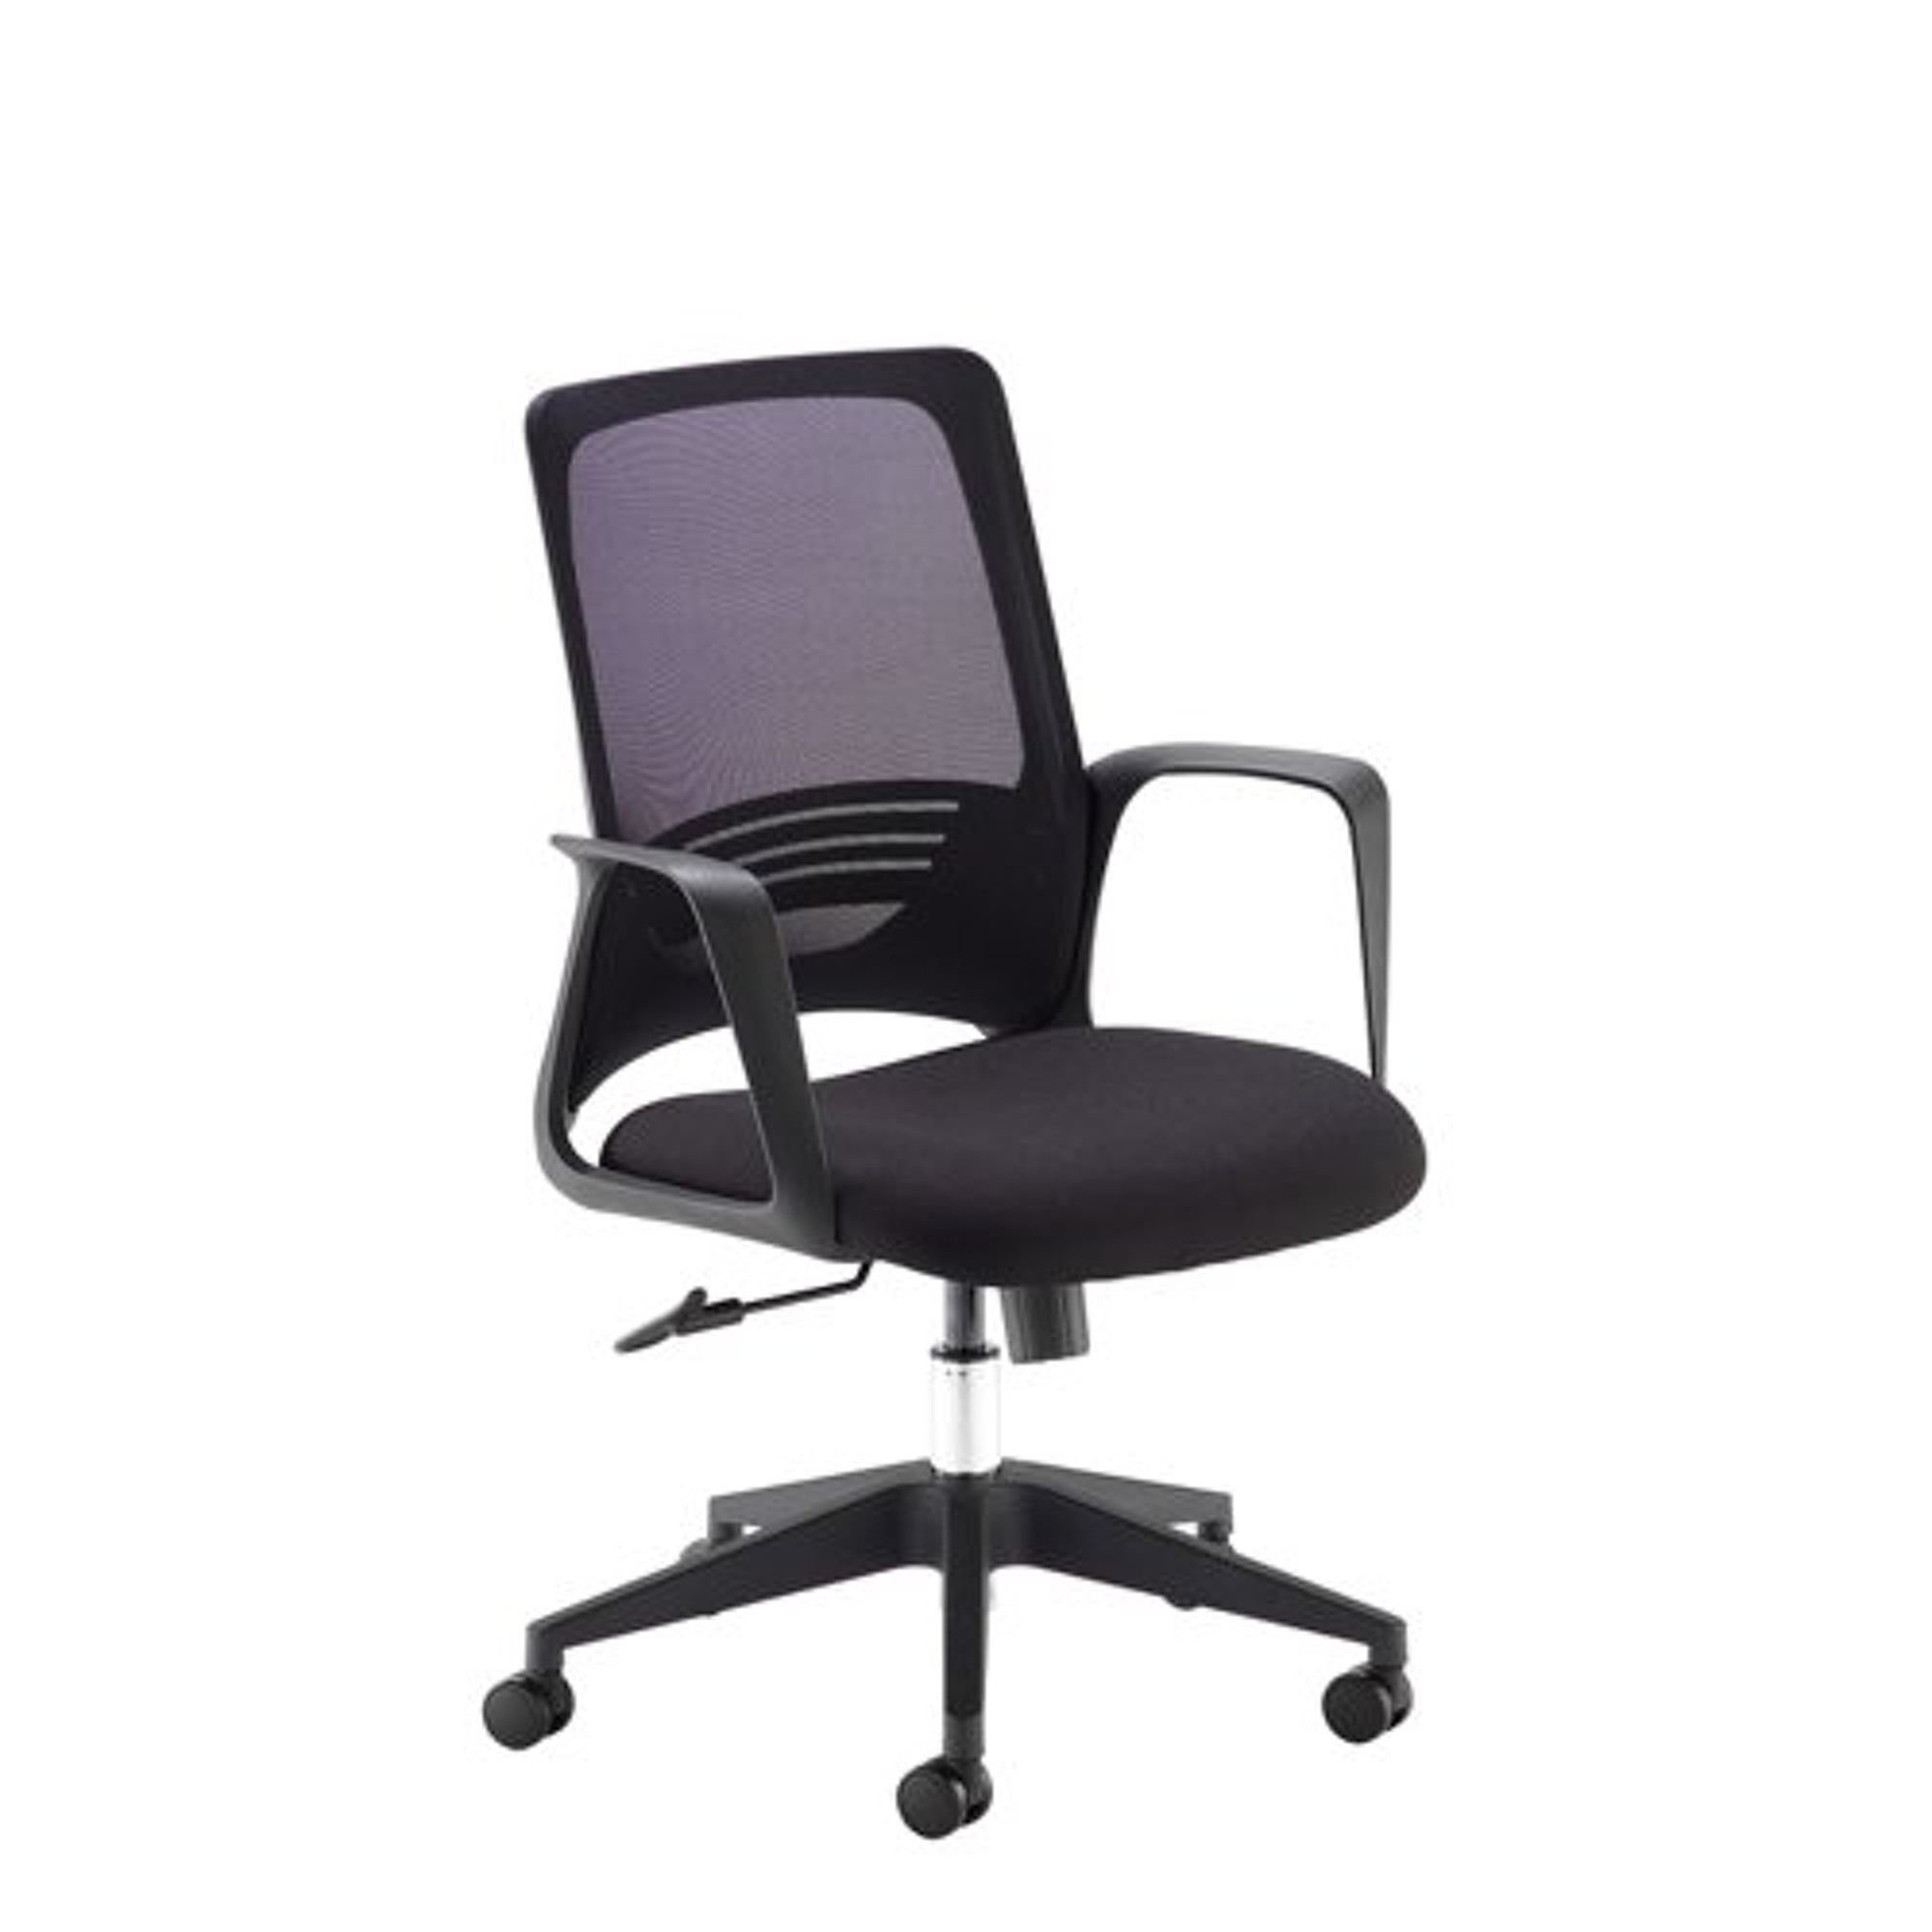 Toto+black+mesh+back+operator+chair+with+black+fabric+seat+and+black+base